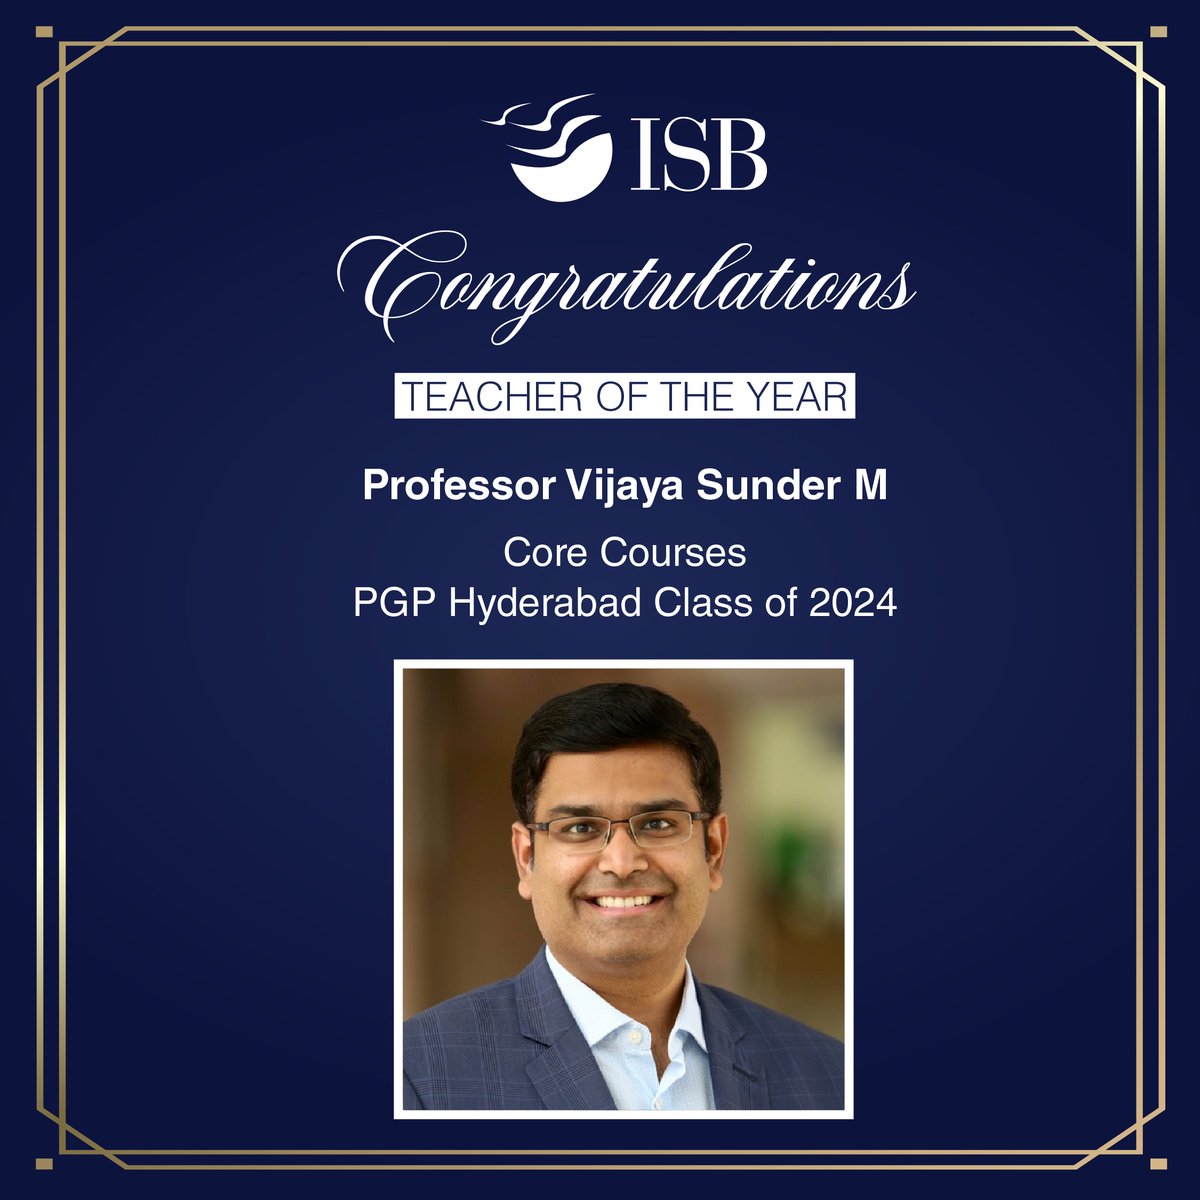 Congratulations to Professor Sumit Kunnumkal, Professor Milind Sohoni and Professor Vijaya Sunder M on being chosen as 'Teacher of the Year' for Core Courses by the Post Graduate Programme in Management (PGP) Class of 2024, Hyderabad cohort. #ISB #TeacherOfTheYear #PGP